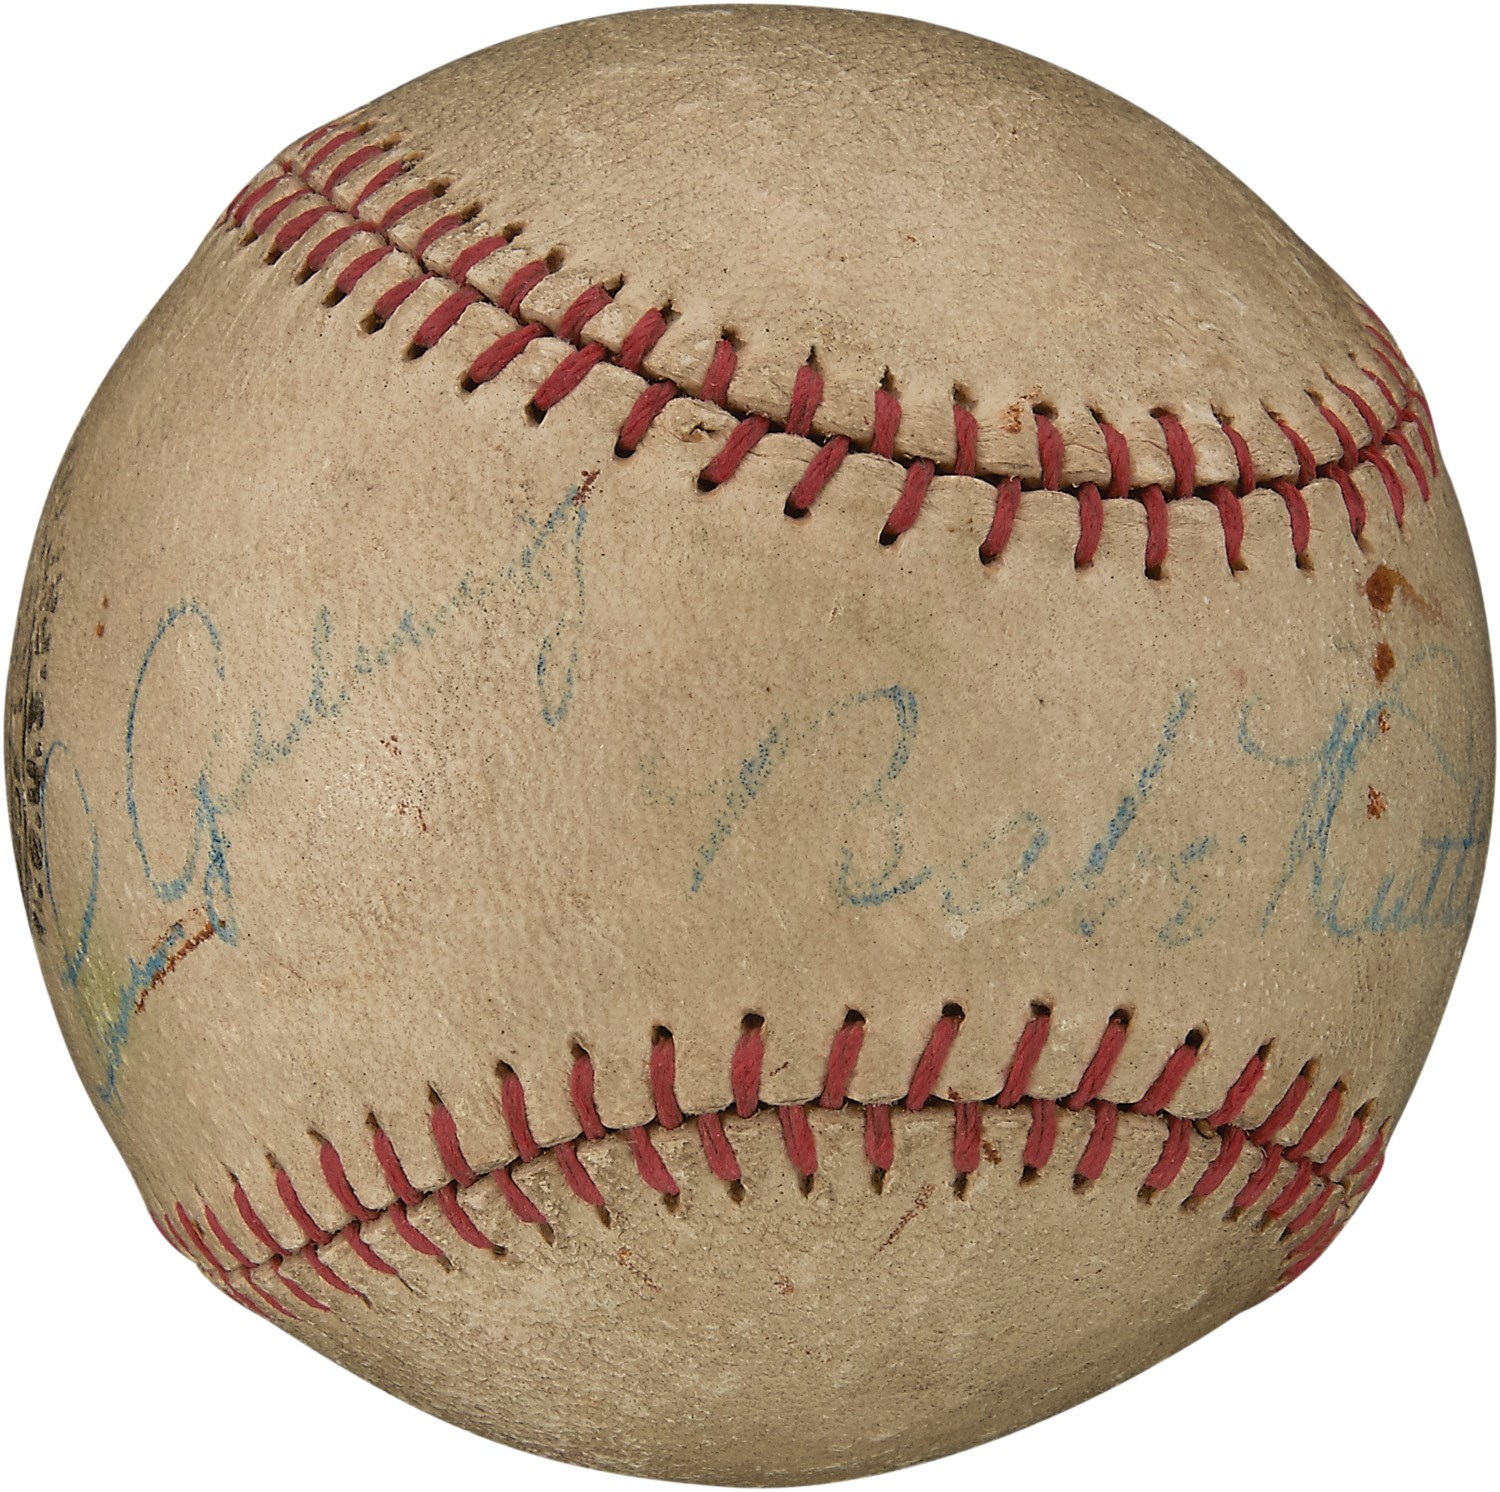 - Circa 1930 Babe Ruth & Lou Gehrig Side-by-Side Dual Signed Baseball (PSA & SGC)